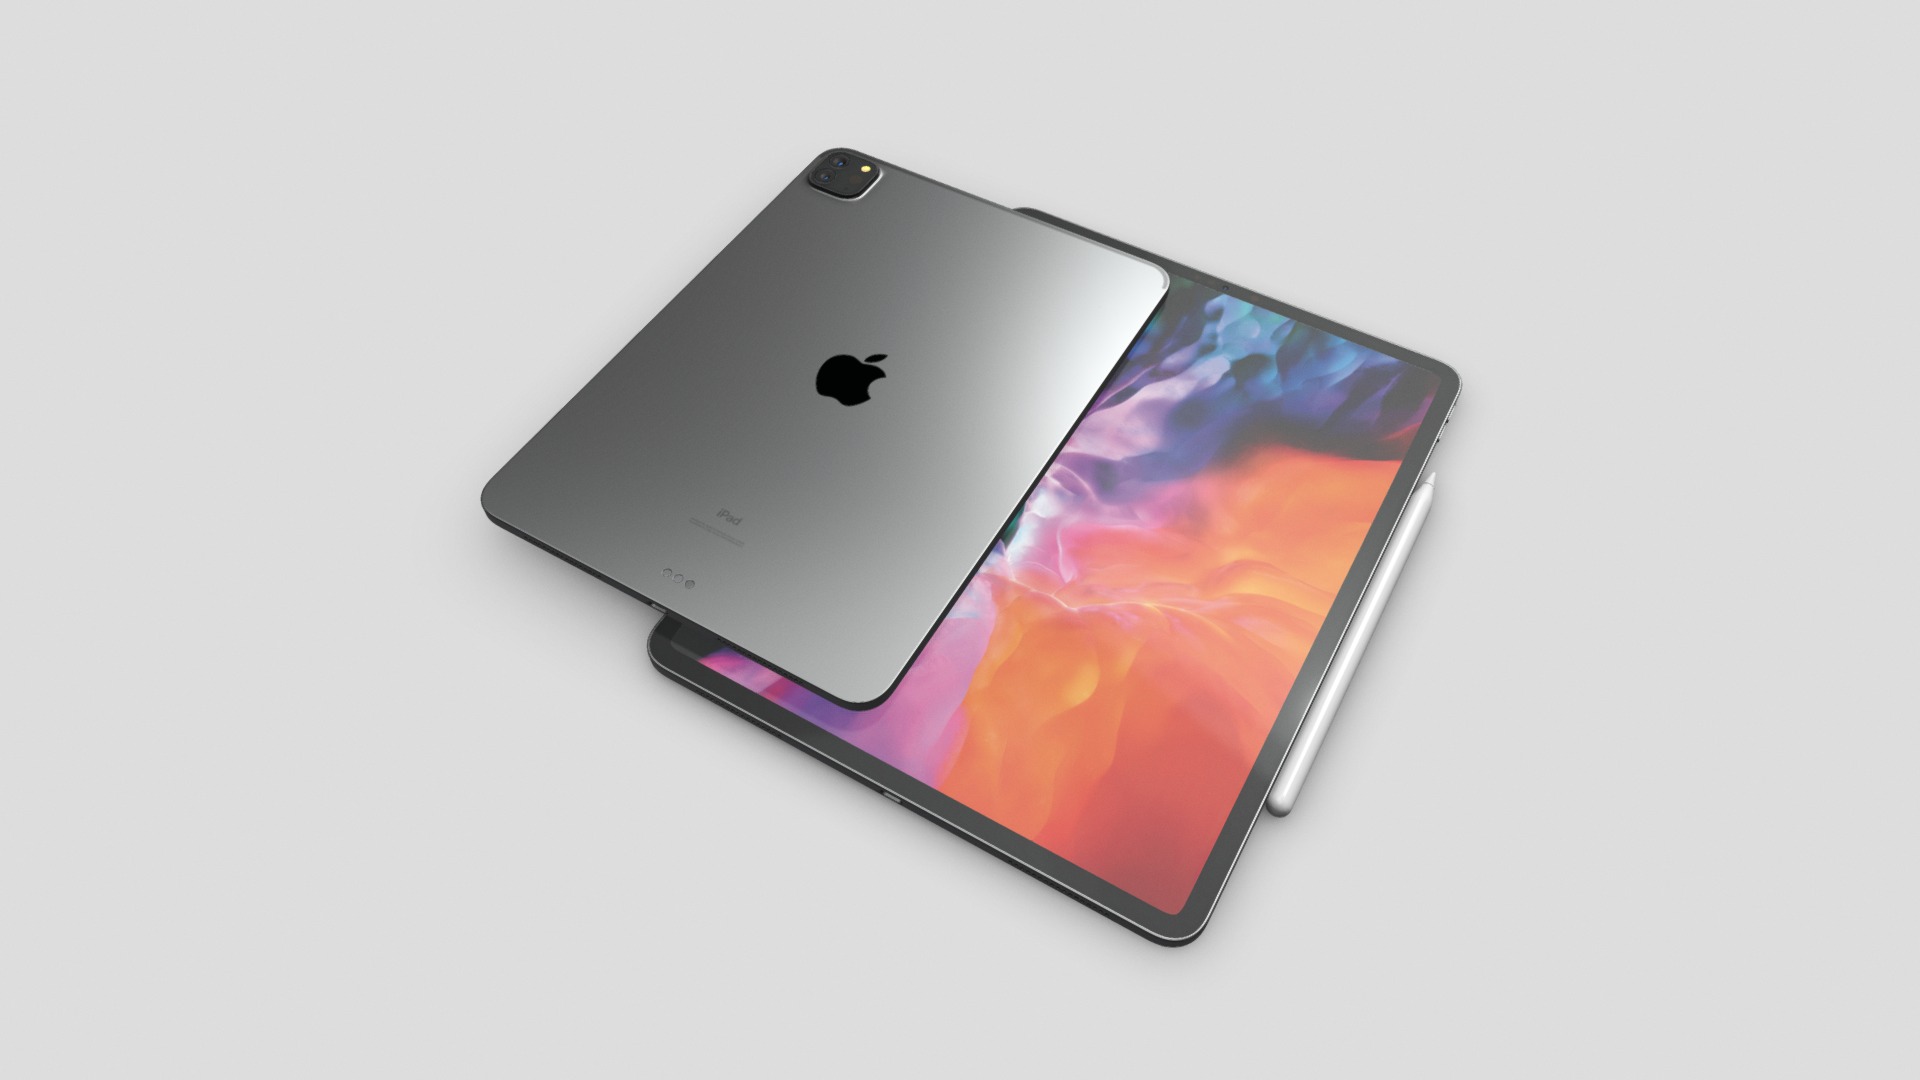 3D model iPad Pro 2020 with Apple Pencil 2 - This is a 3D model of the iPad Pro 2020 with Apple Pencil 2. The 3D model is about a cell phone with a cracked screen.